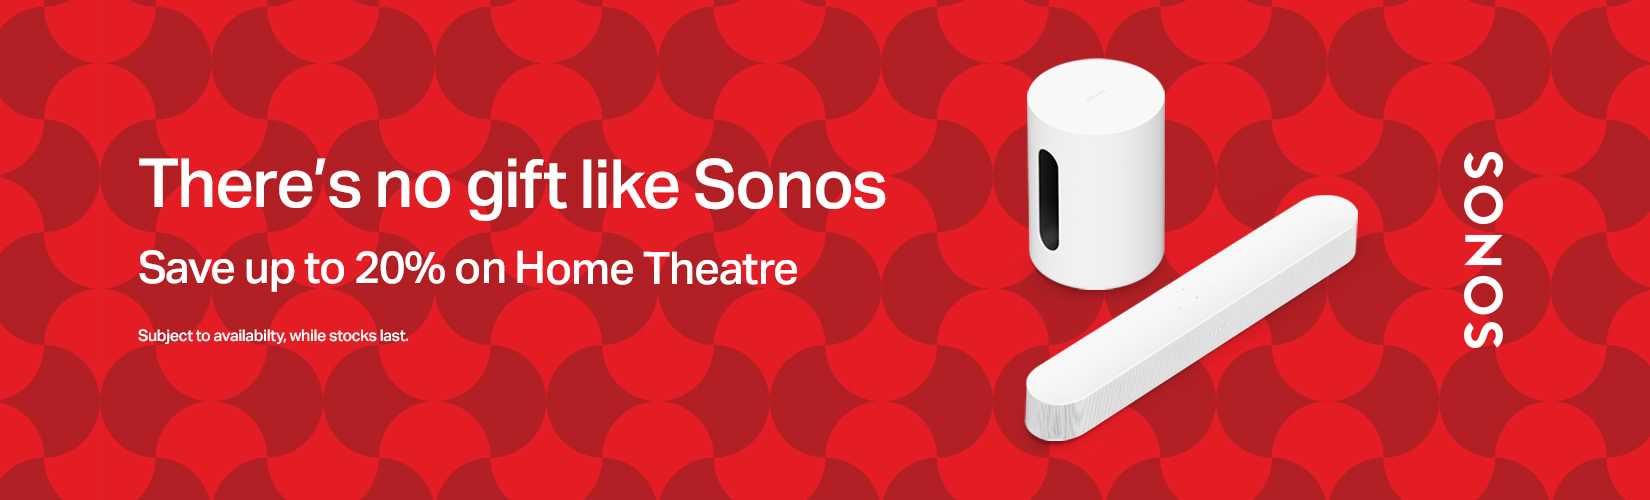 Sonos. There's no gift like Sonos. Save up to 20% on Home Theatre.